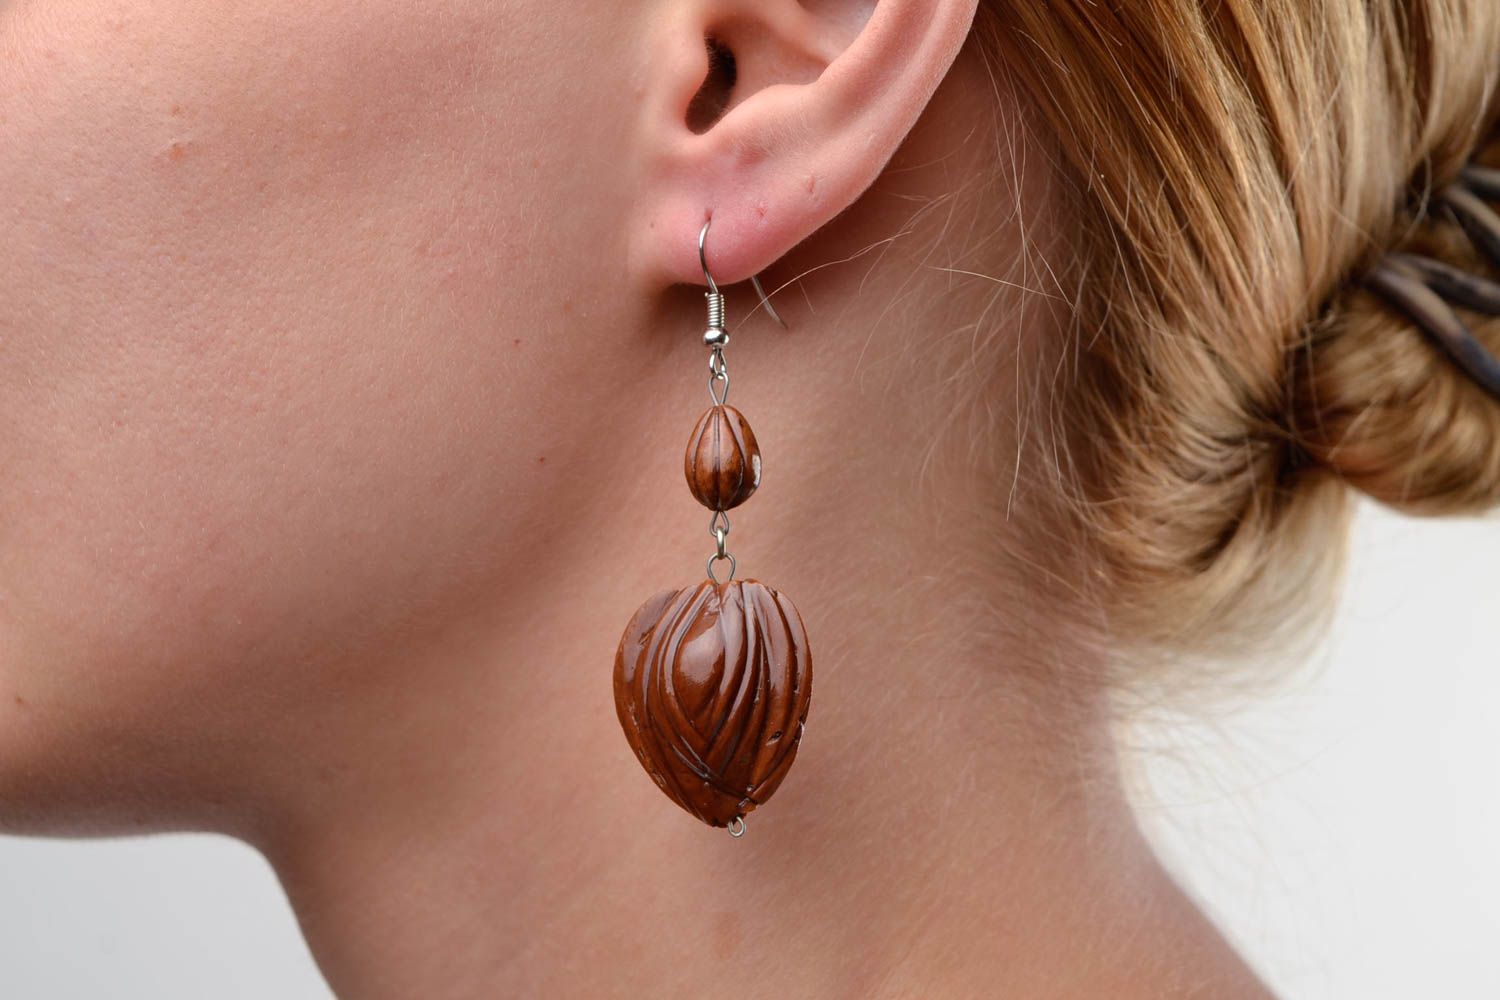 Handmade earrings wooden earrings fashion accessories designer gifts for girl photo 1